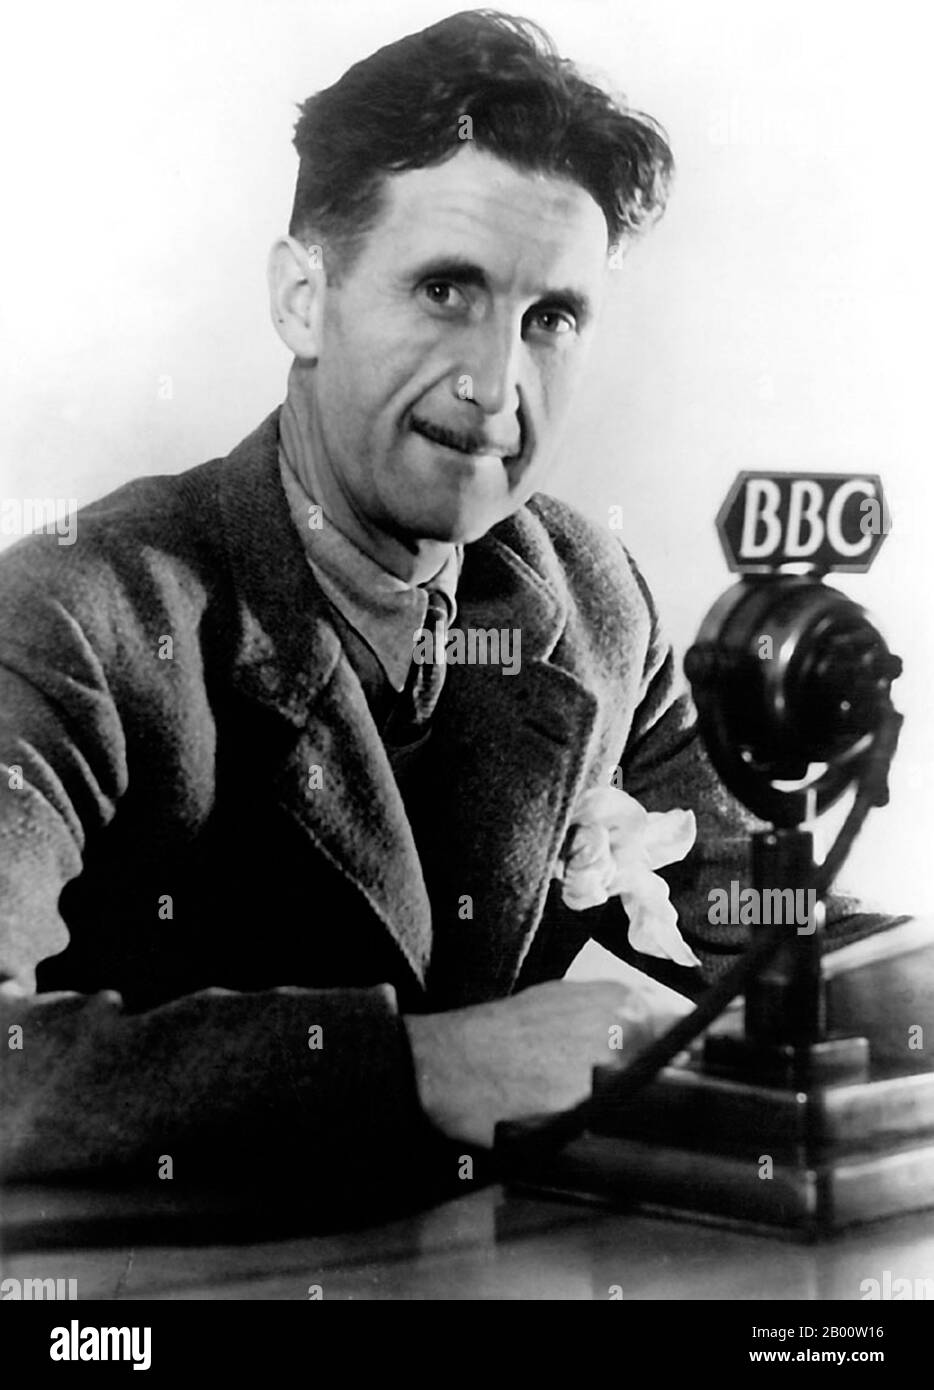 Eric Arthur Blair (25 June 1903 – 21 January 1950), better known by his pen name George Orwell, was an English author and journalist, 1940.  Eric Arthur Blair (25 June 1903 – 21 January 1950), better known by his pen name George Orwell, was an English author and journalist. His work is marked by keen intelligence and wit, a profound awareness of social injustice, an intense, revolutionary opposition to totalitarianism, a passion for clarity in language and a belief in democratic socialism. Stock Photo